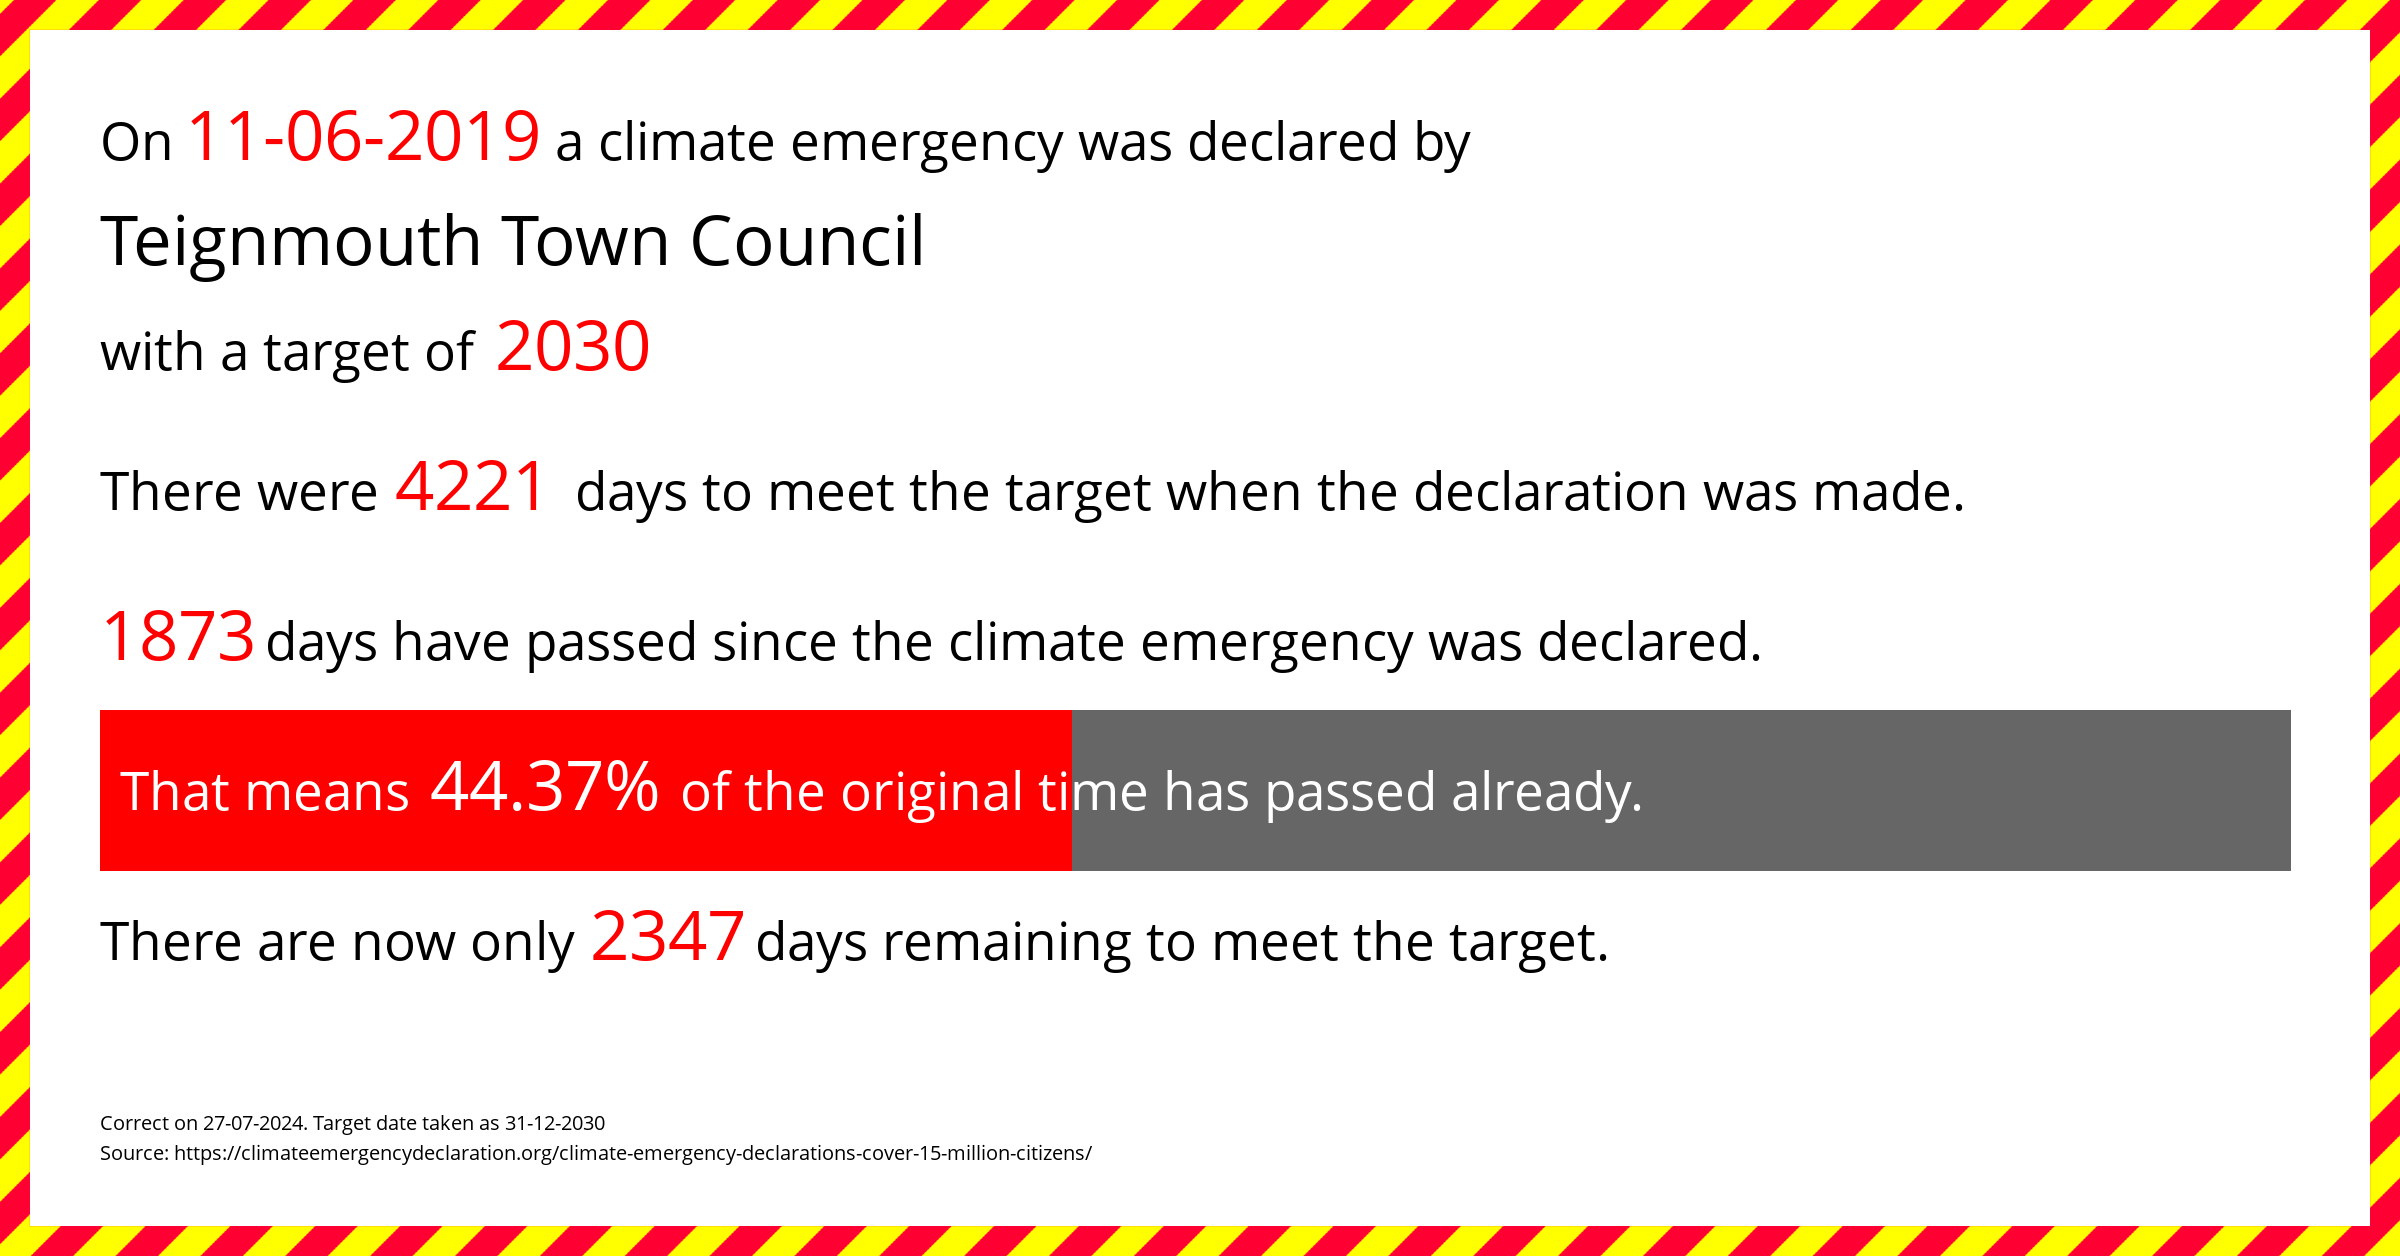 Teignmouth Town Council declared a Climate emergency on Tuesday 11th June 2019, with a target of 2030.